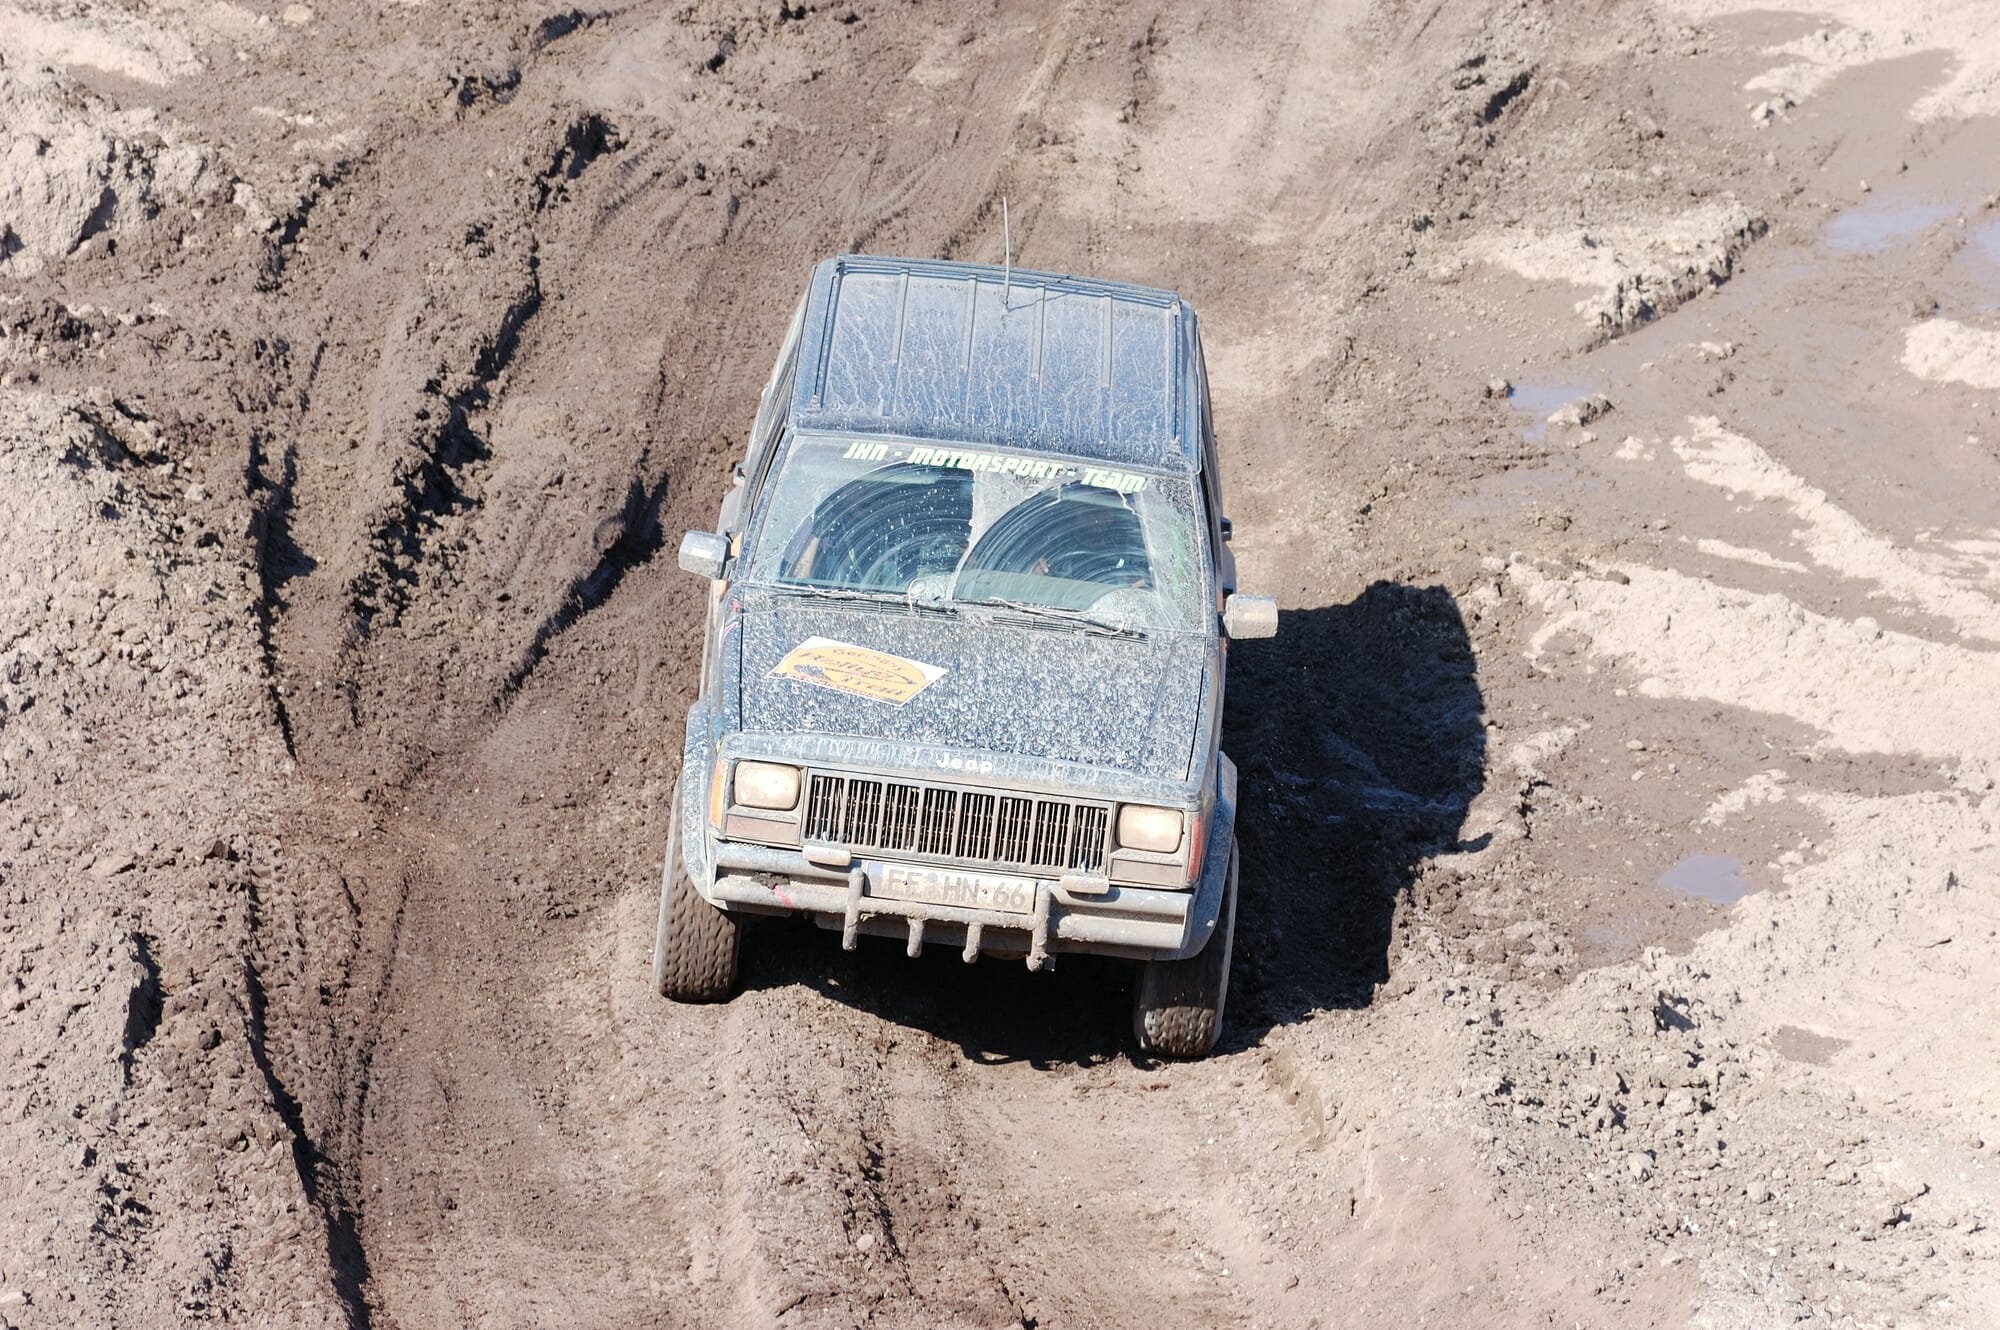 Jeep Grand Cherokee at offroad rally competition